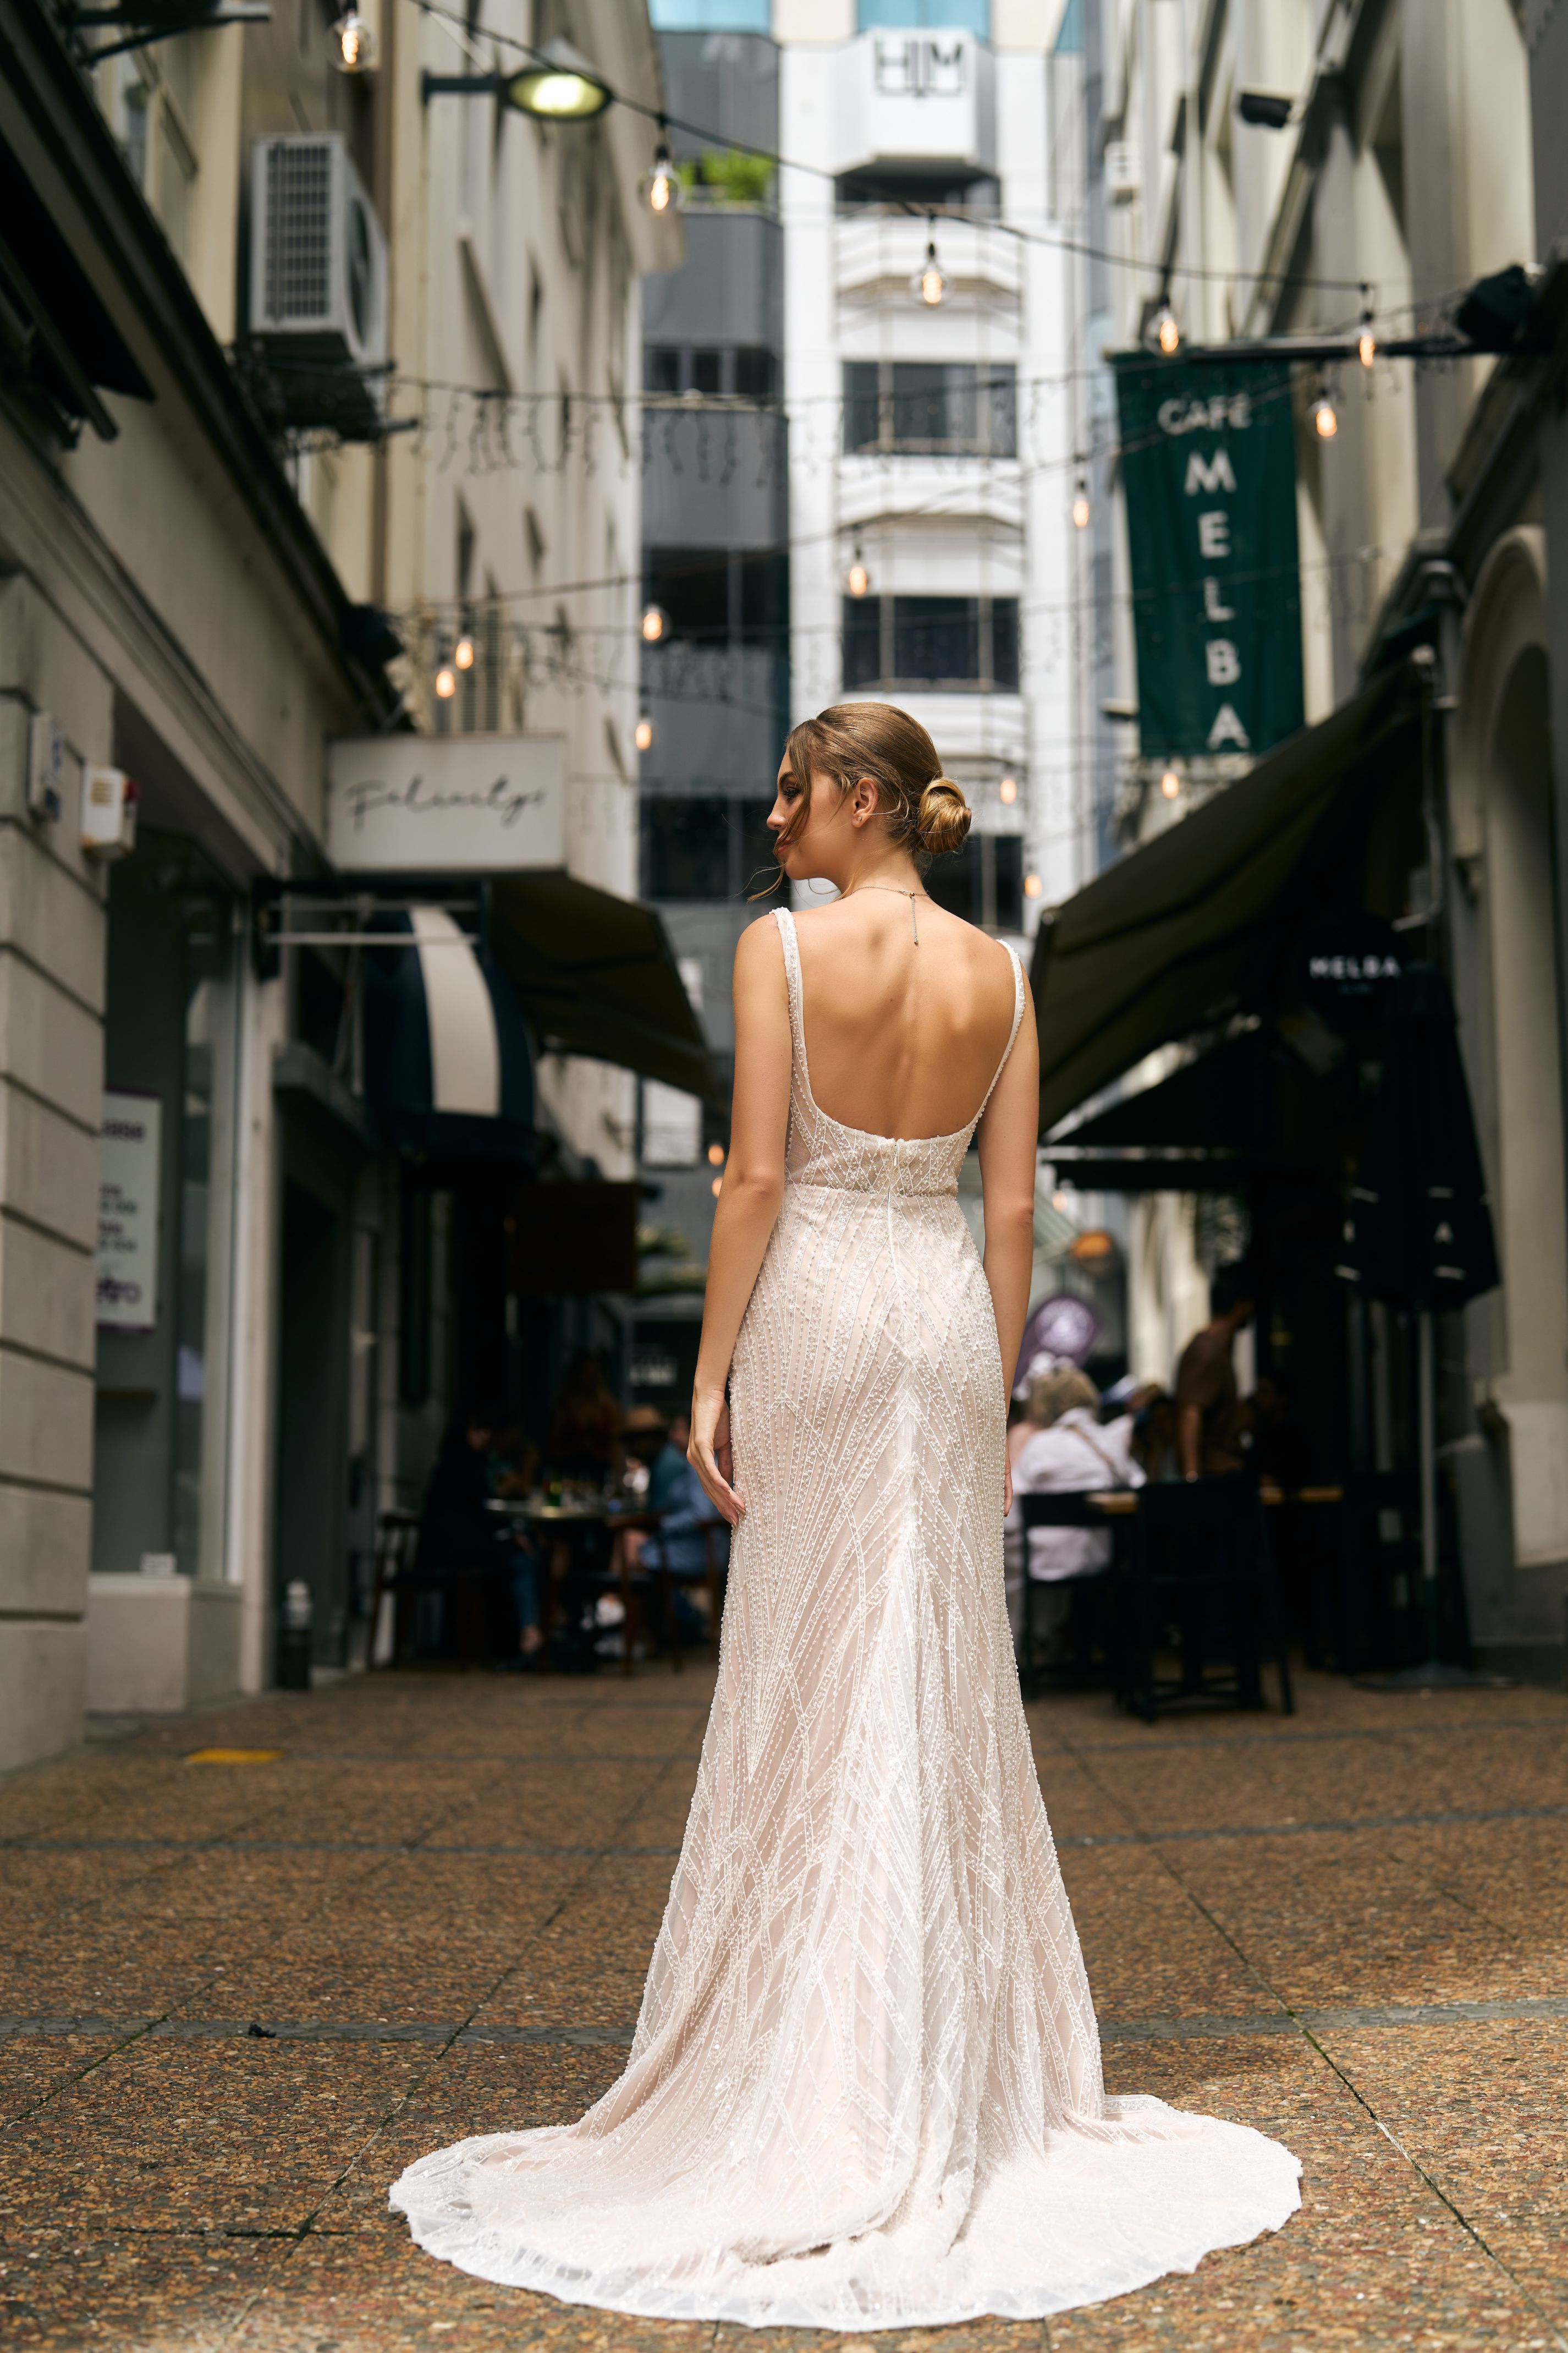 Fashioned with beaded lace, this fit-n-flare gown features a square neckline and fully boned bodice and beaded straps. Back view, low back with beaded train.